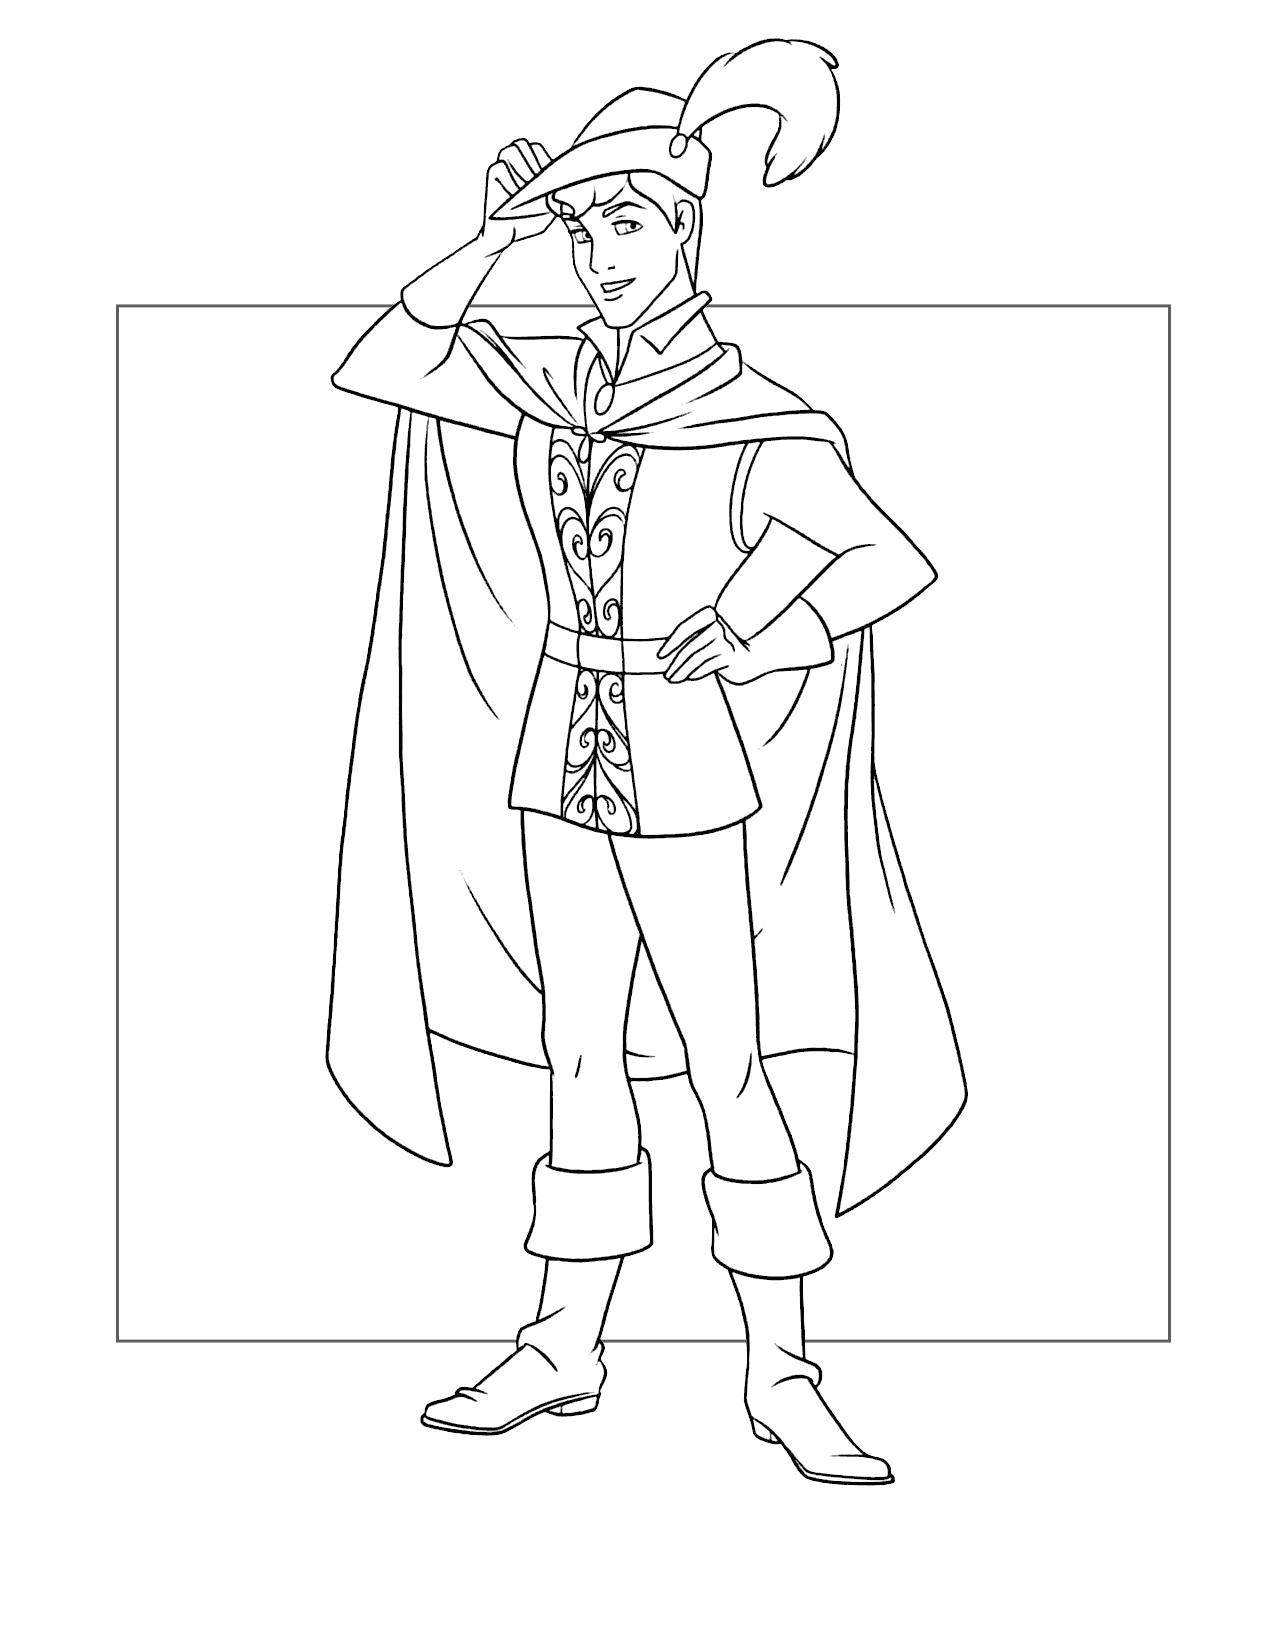 Prince Phillip Sleeping Beauty Coloring Pages